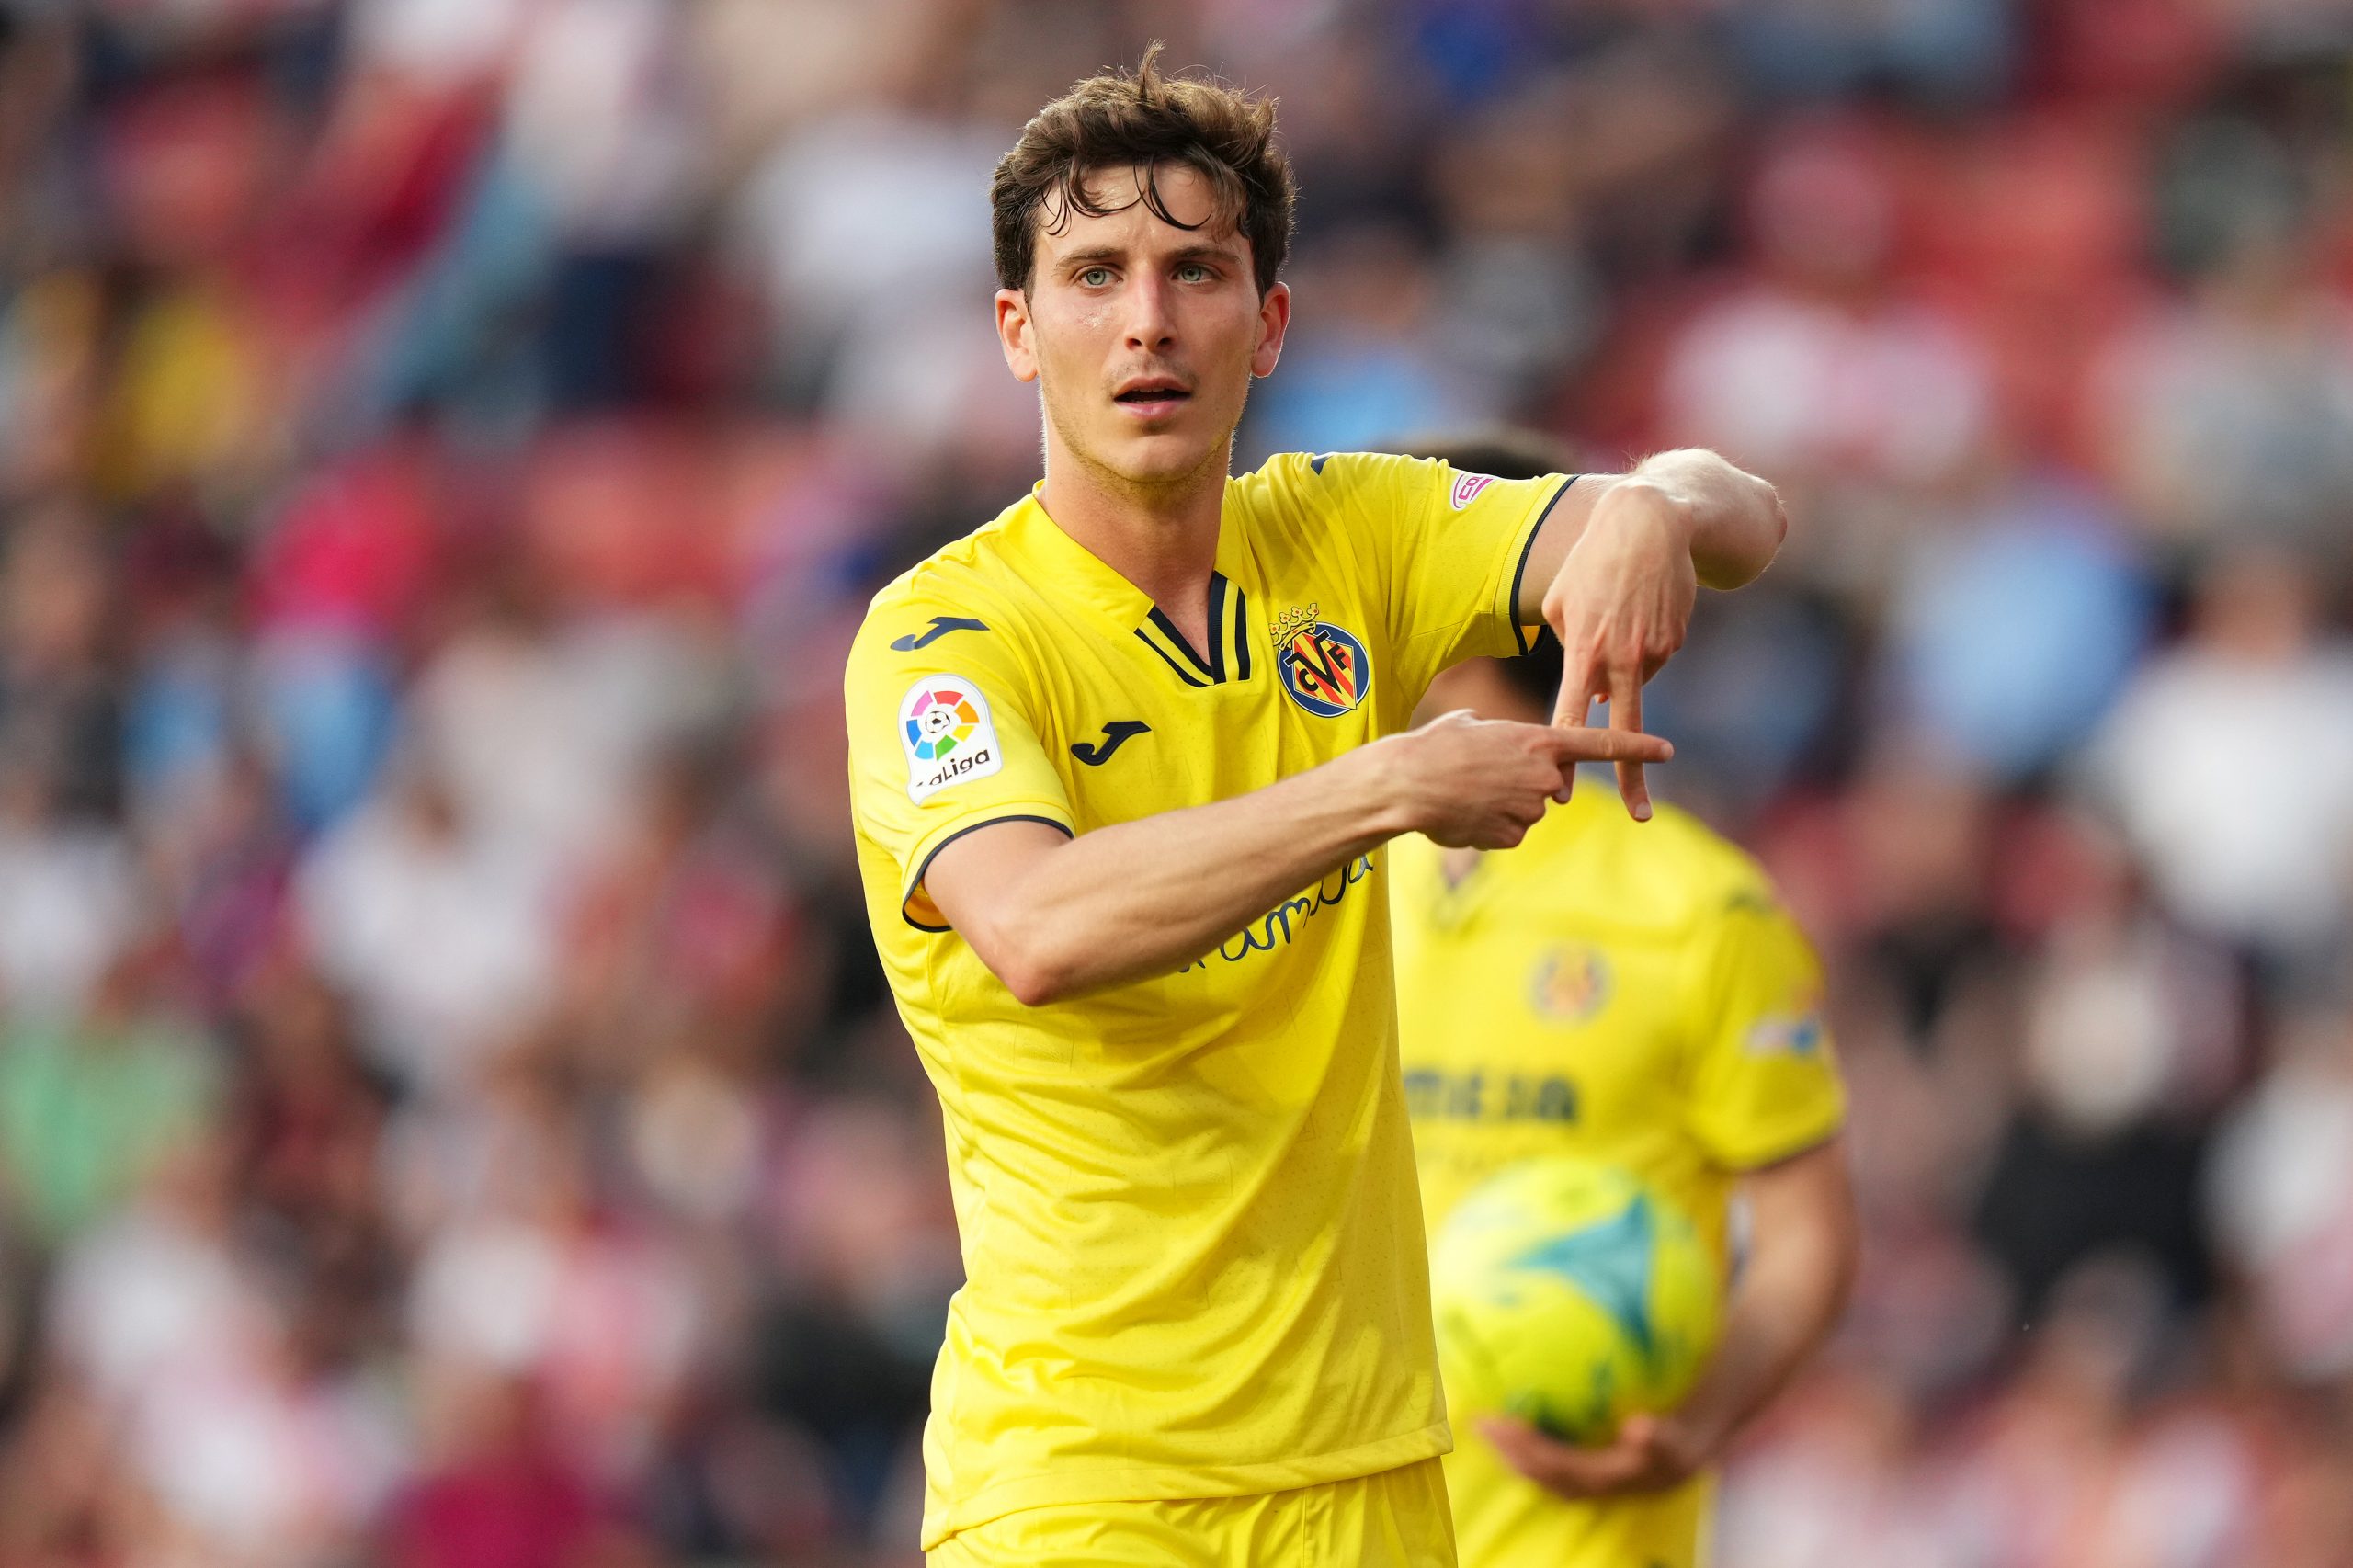 Pau Torres in action for Villarreal vs Rayo Vallecano. (Photo by Angel Martinez/Getty Images)